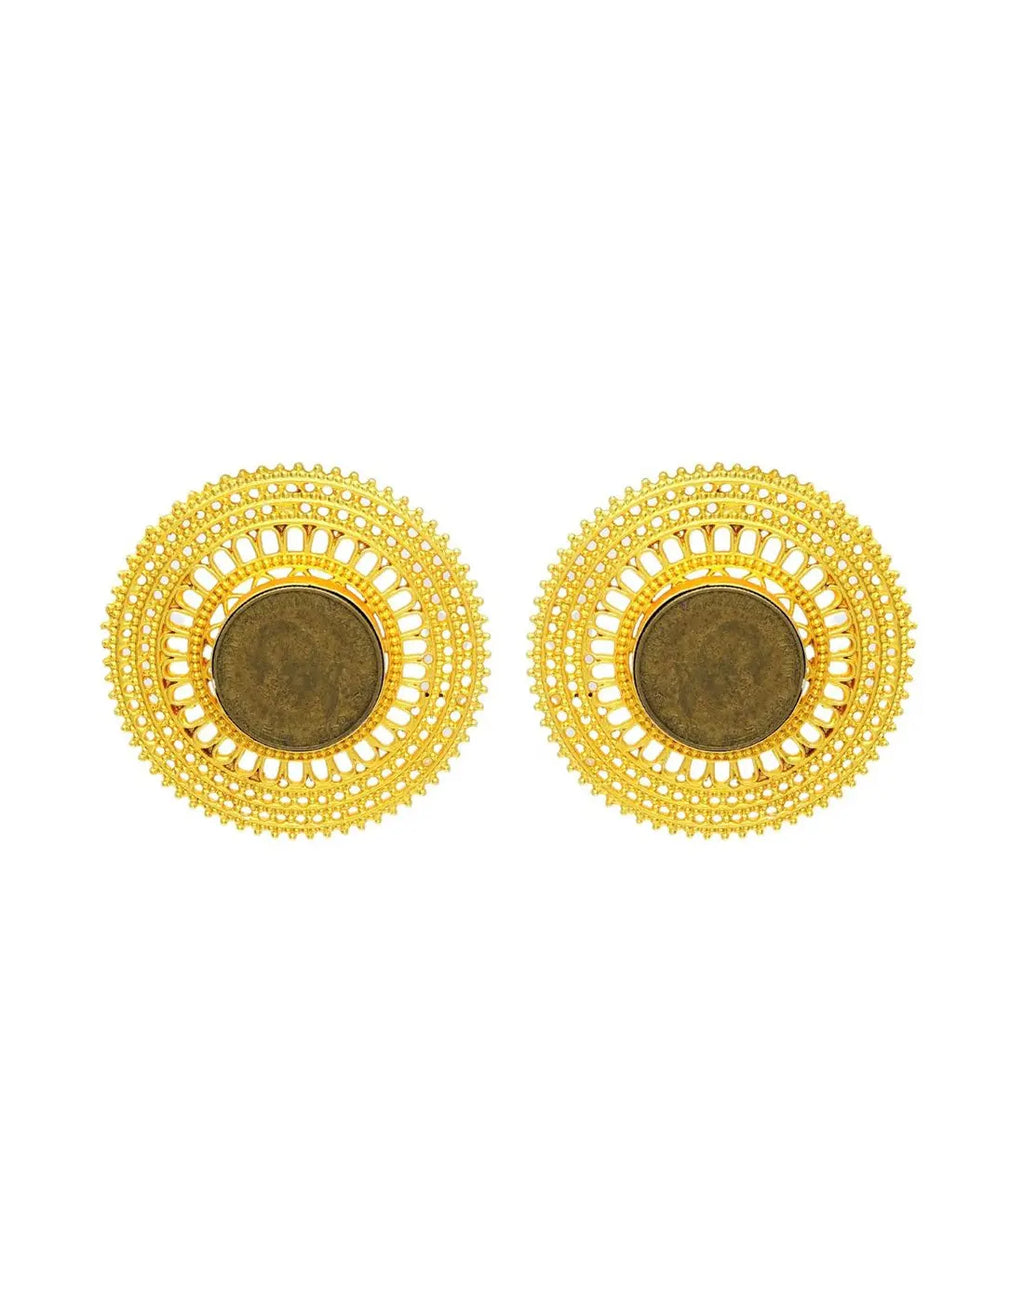 Megara Coin Earrings- Handcrafted Jewellery from Dori